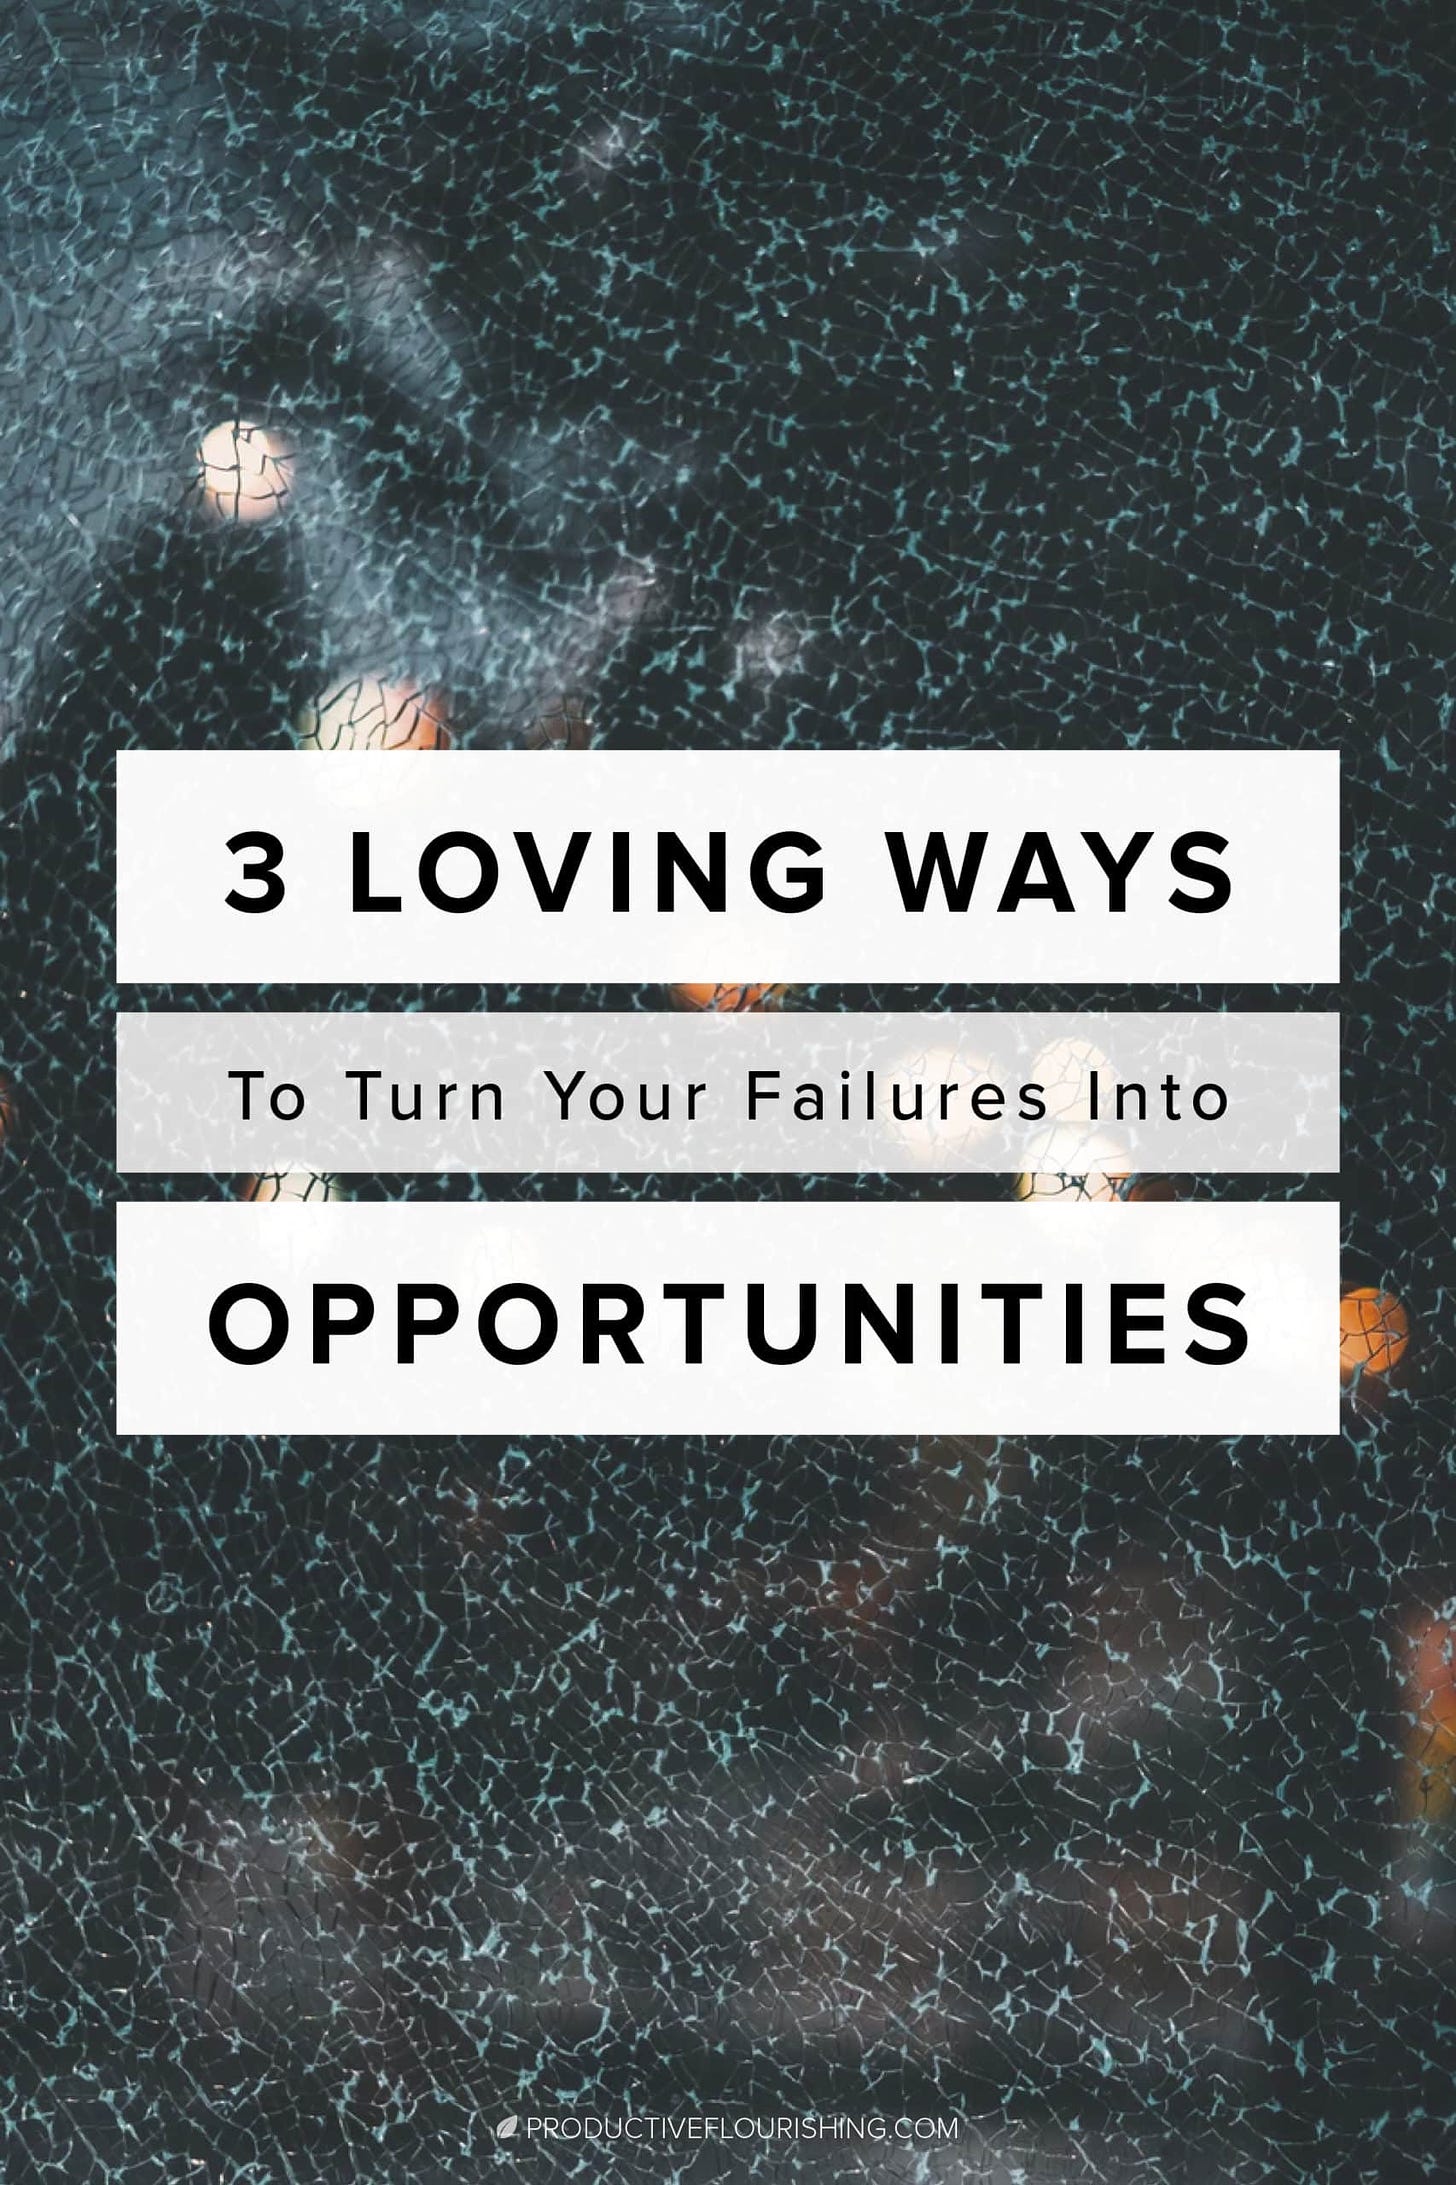 Here are a few ways you can handle your setbacks in a way that also propels you onward and upward (AKA turn your failures into opportunities). It’s inevitable that when we embark on ambitious endeavors, there will be setbacks. Learn three ways to turn your failures into opportunities. #businessfailure #entrepreneurgoals #productiveflourishing